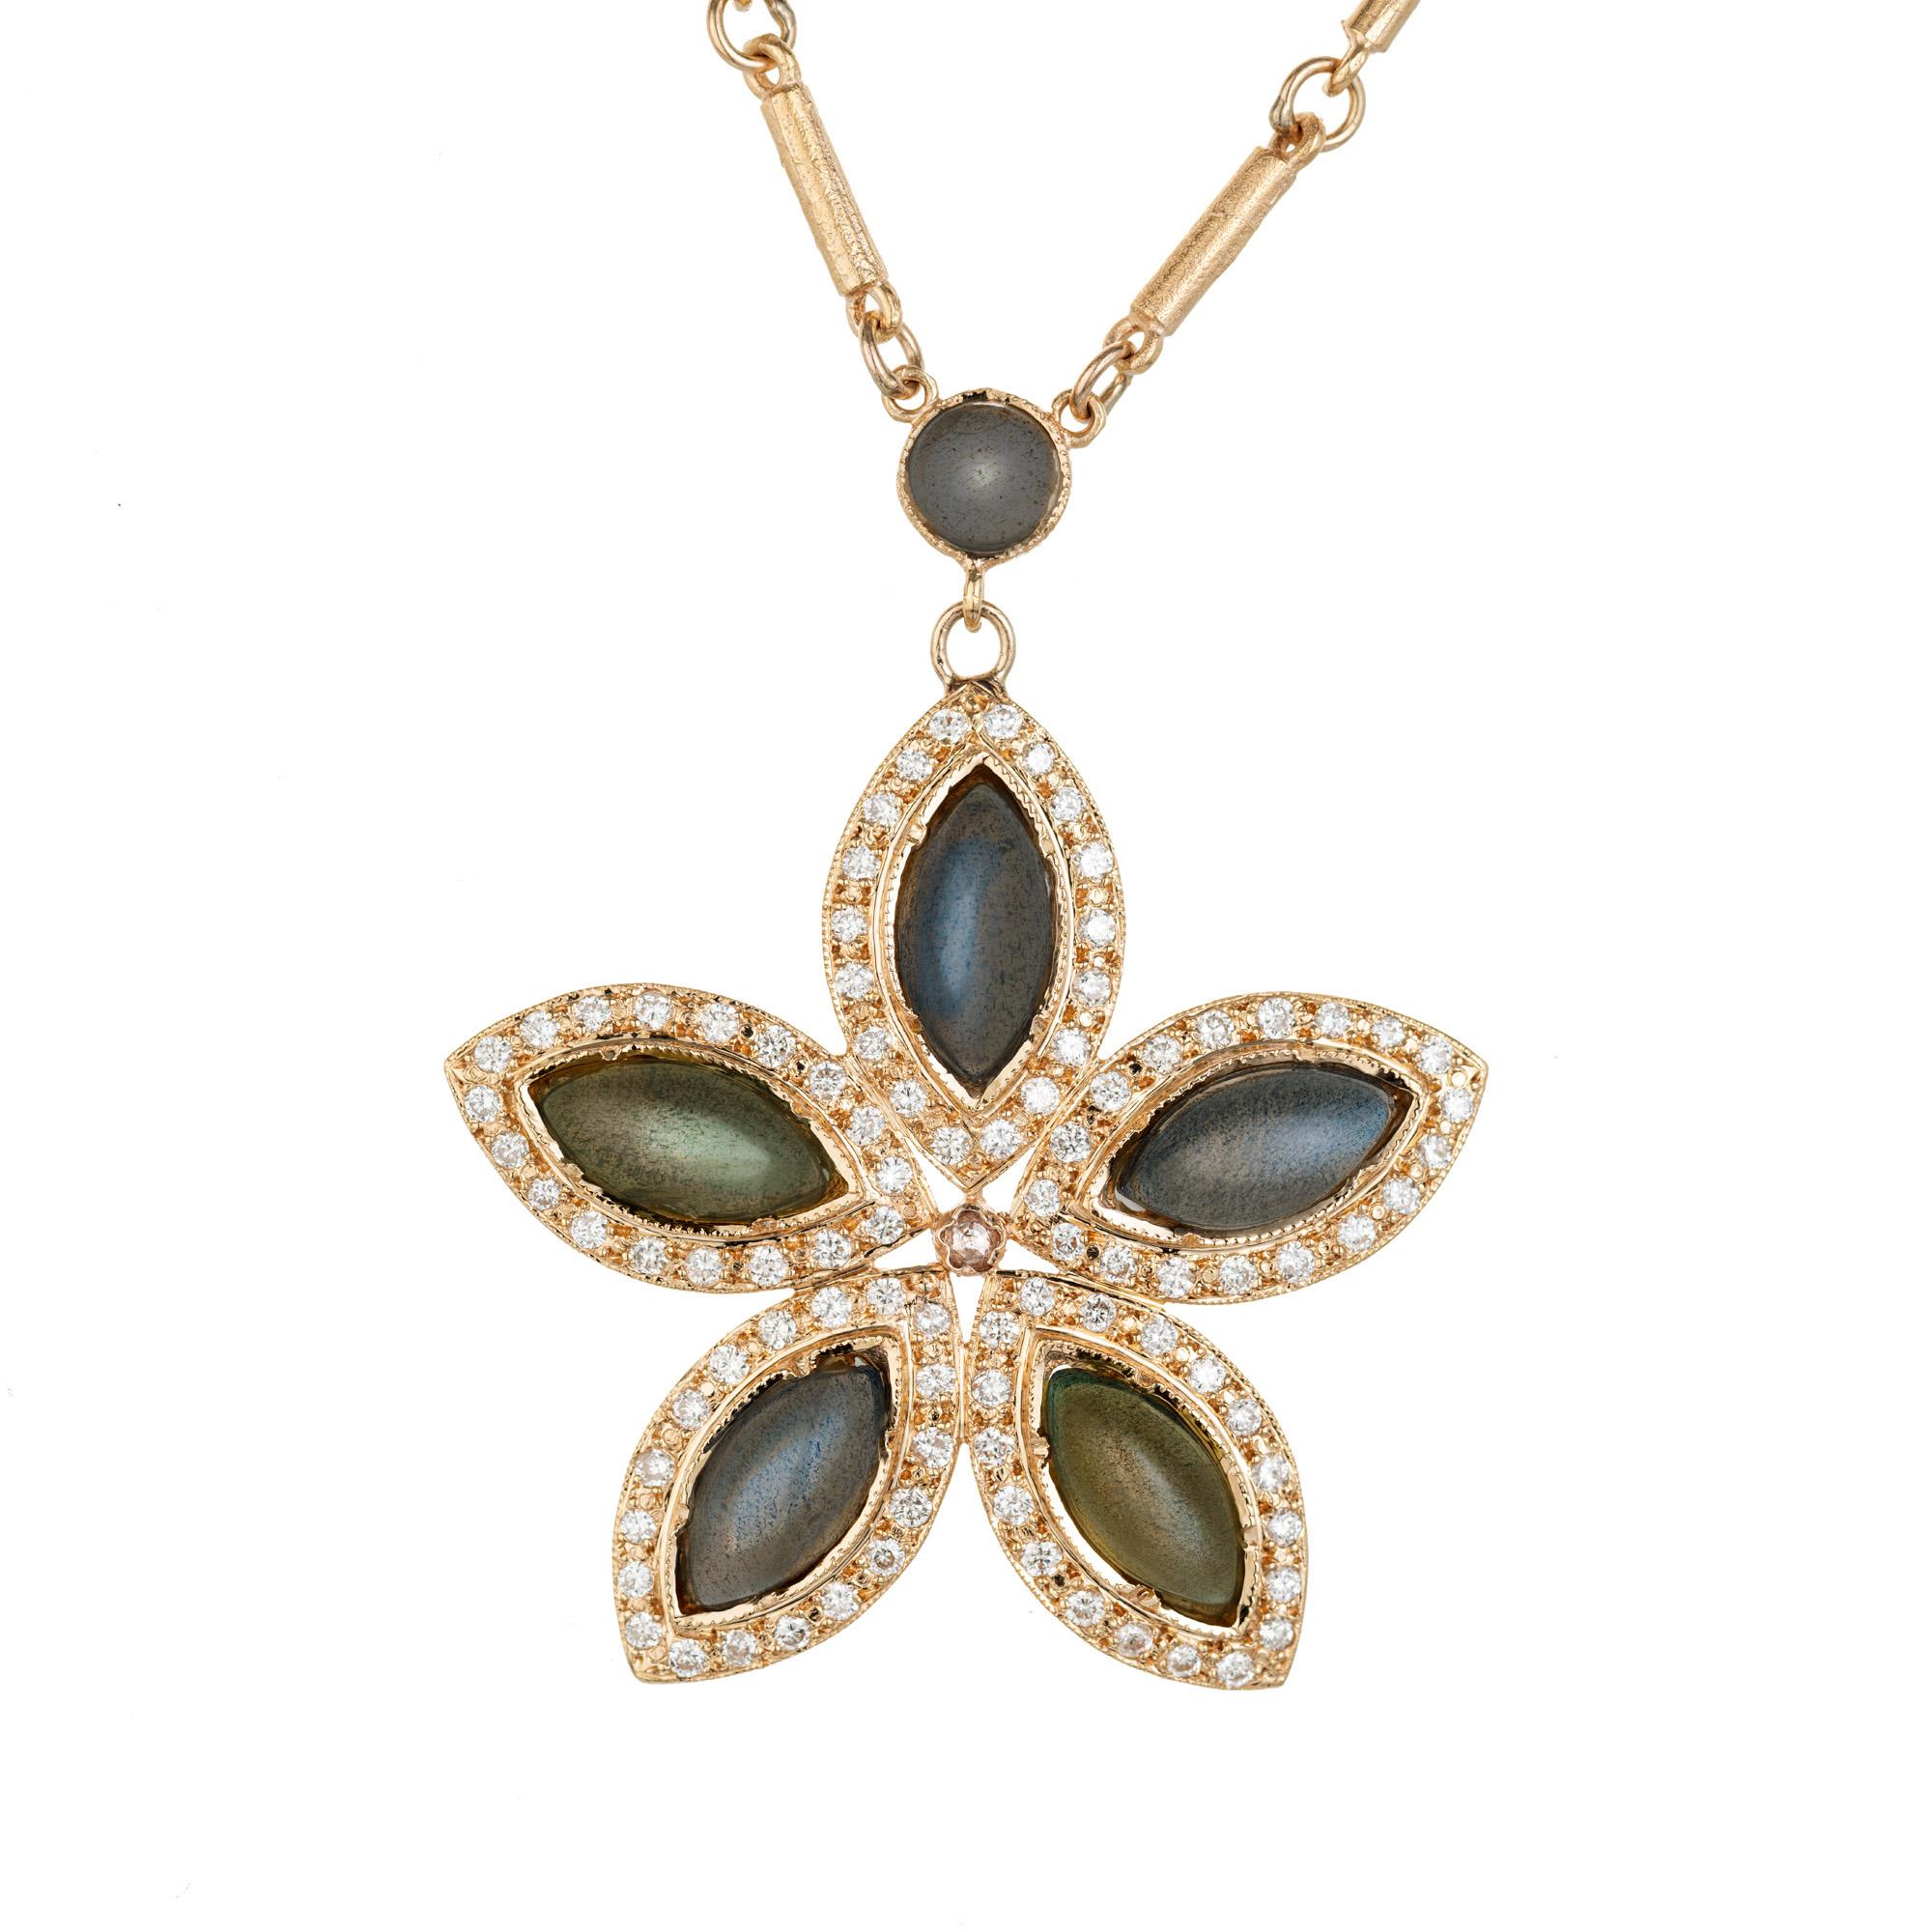 Irene Neuwirth 18k rose gold necklace. 5 cabochon color change marquise Labradorites, each with a halo of round diamonds. 1 round cabochon labradorite.  18.5 inches long.

5 cabochon Marquise Labradorite, 10 x 4.7mm
96 round Diamonds, approx. total